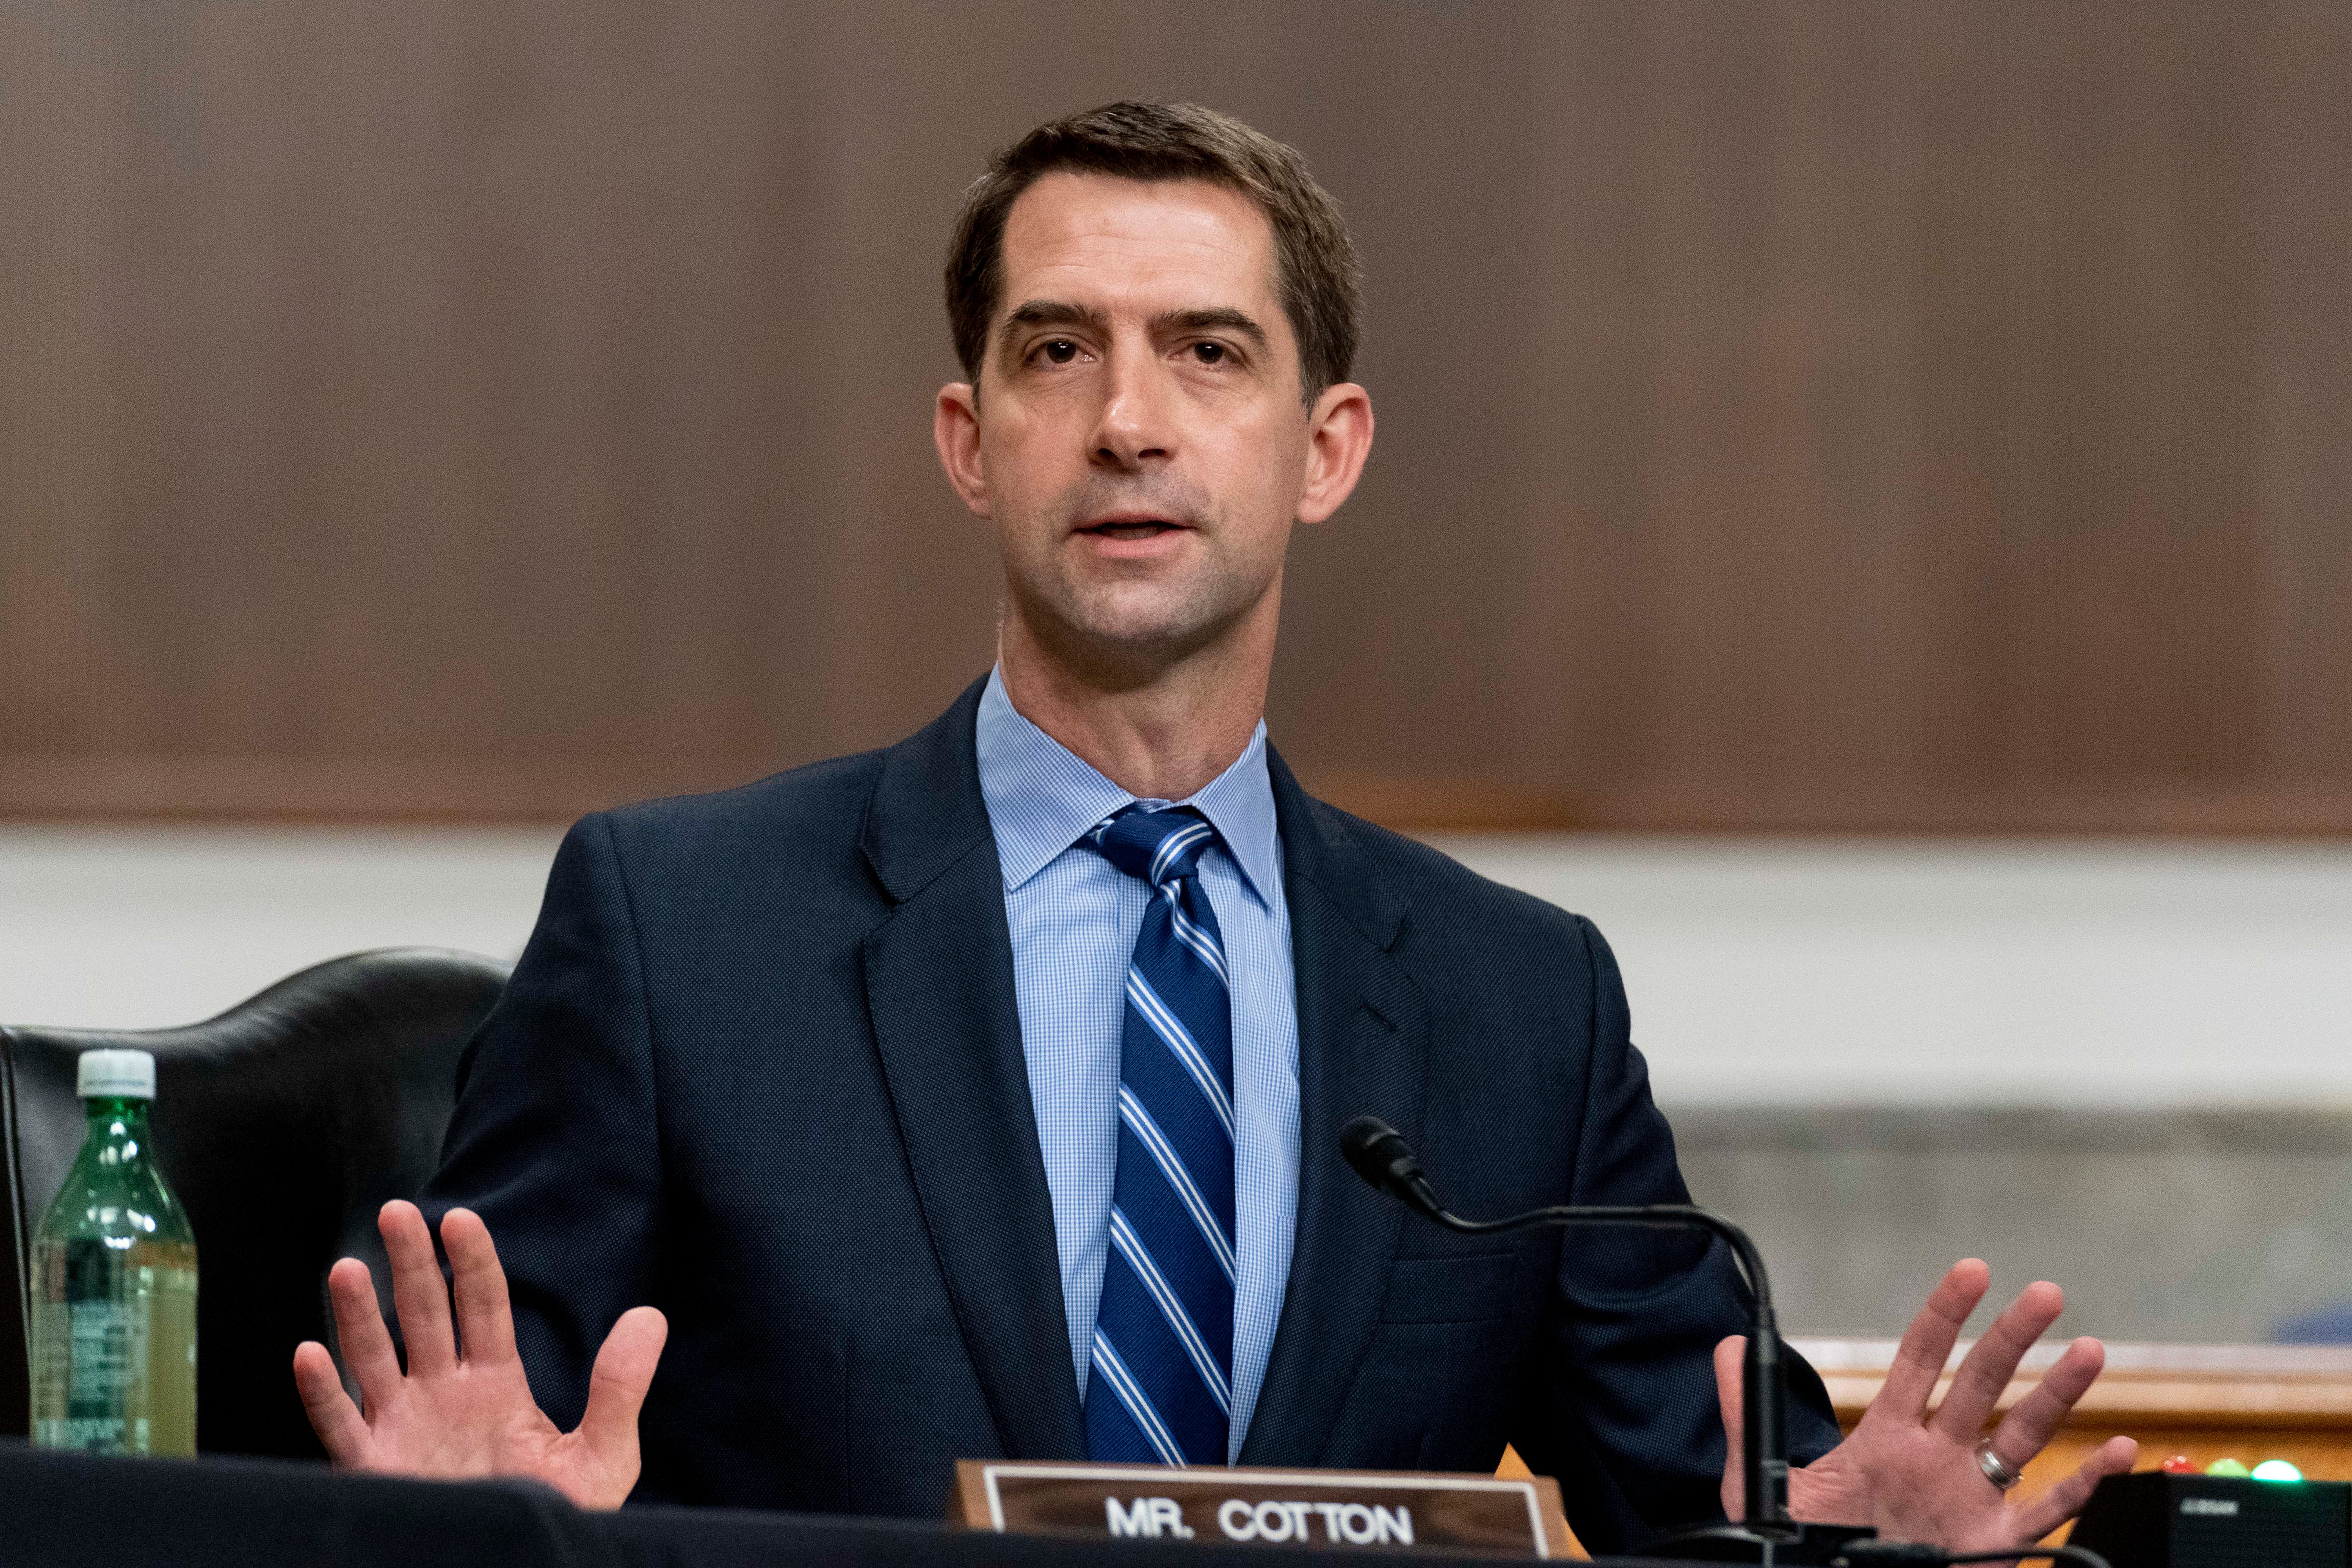 Tom Cotton was responding to a CNN report about crime rises in major urban districts in 2020